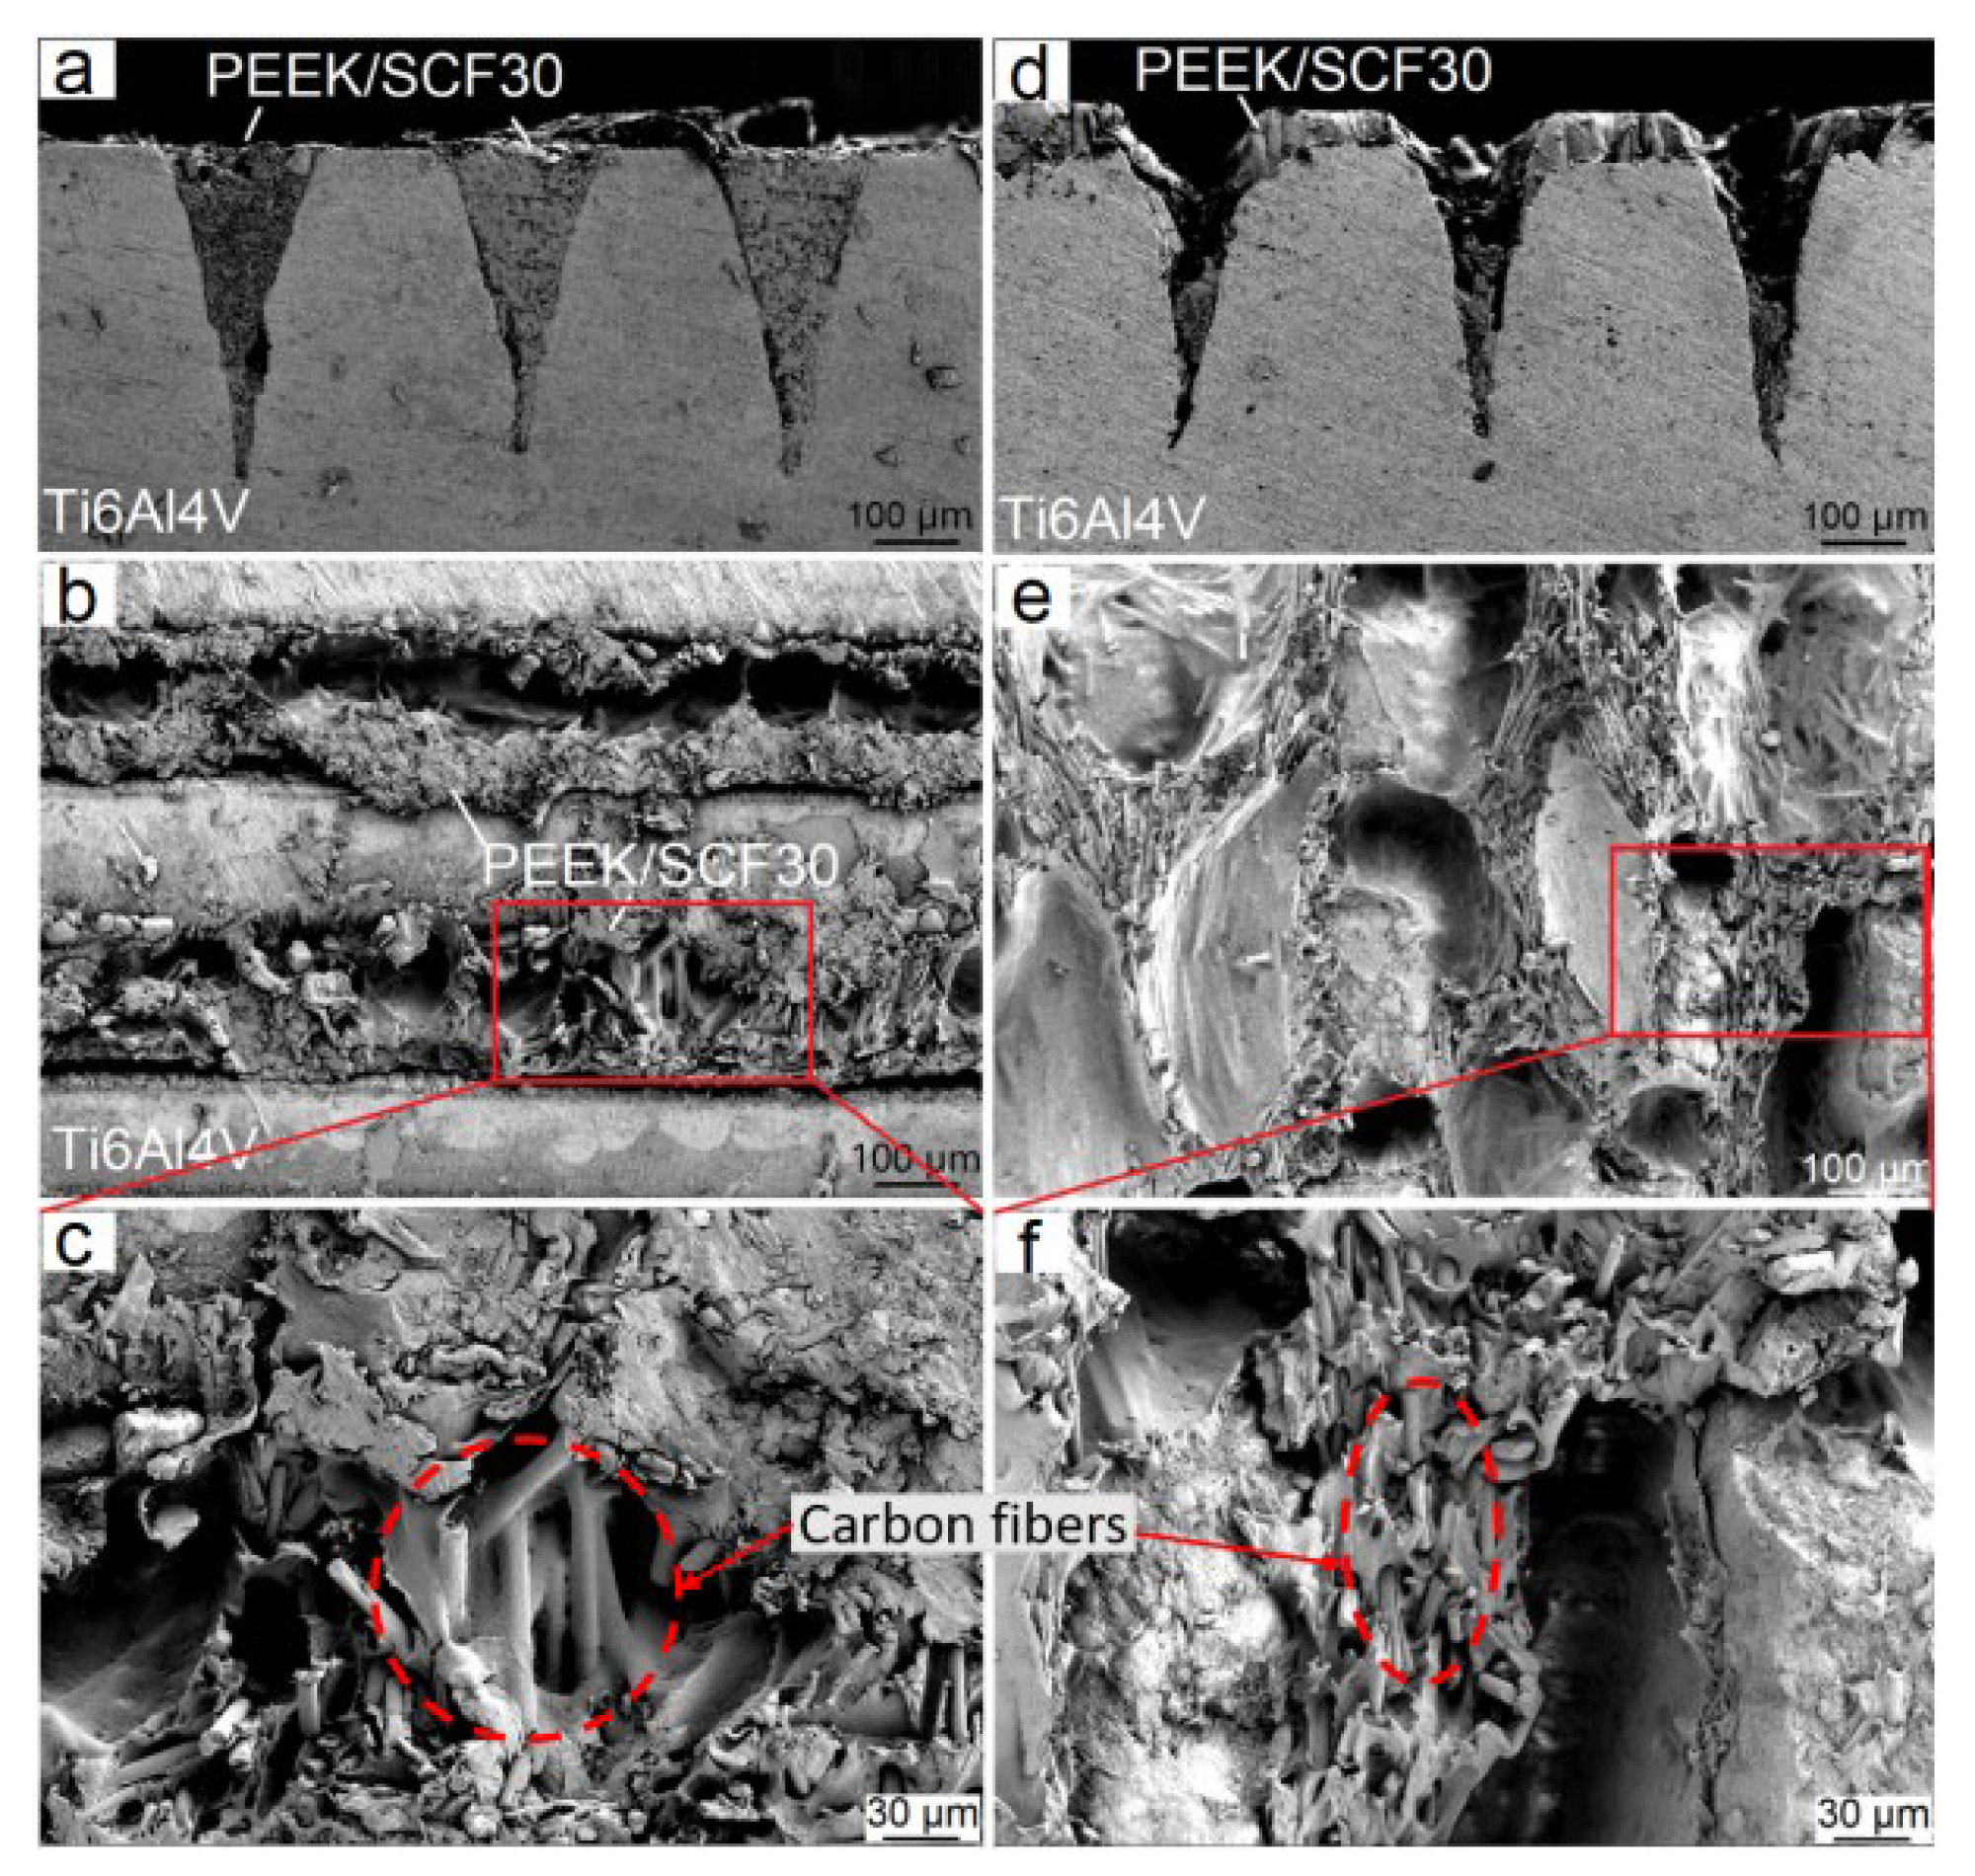 Typical cross-sectional images of the fractured joints ((a), (Sdf = 63.8%), (d), (Sdp = 85.6%)) and the morphologies of the detached surfaces (b,c,e,f) after tensile tests.